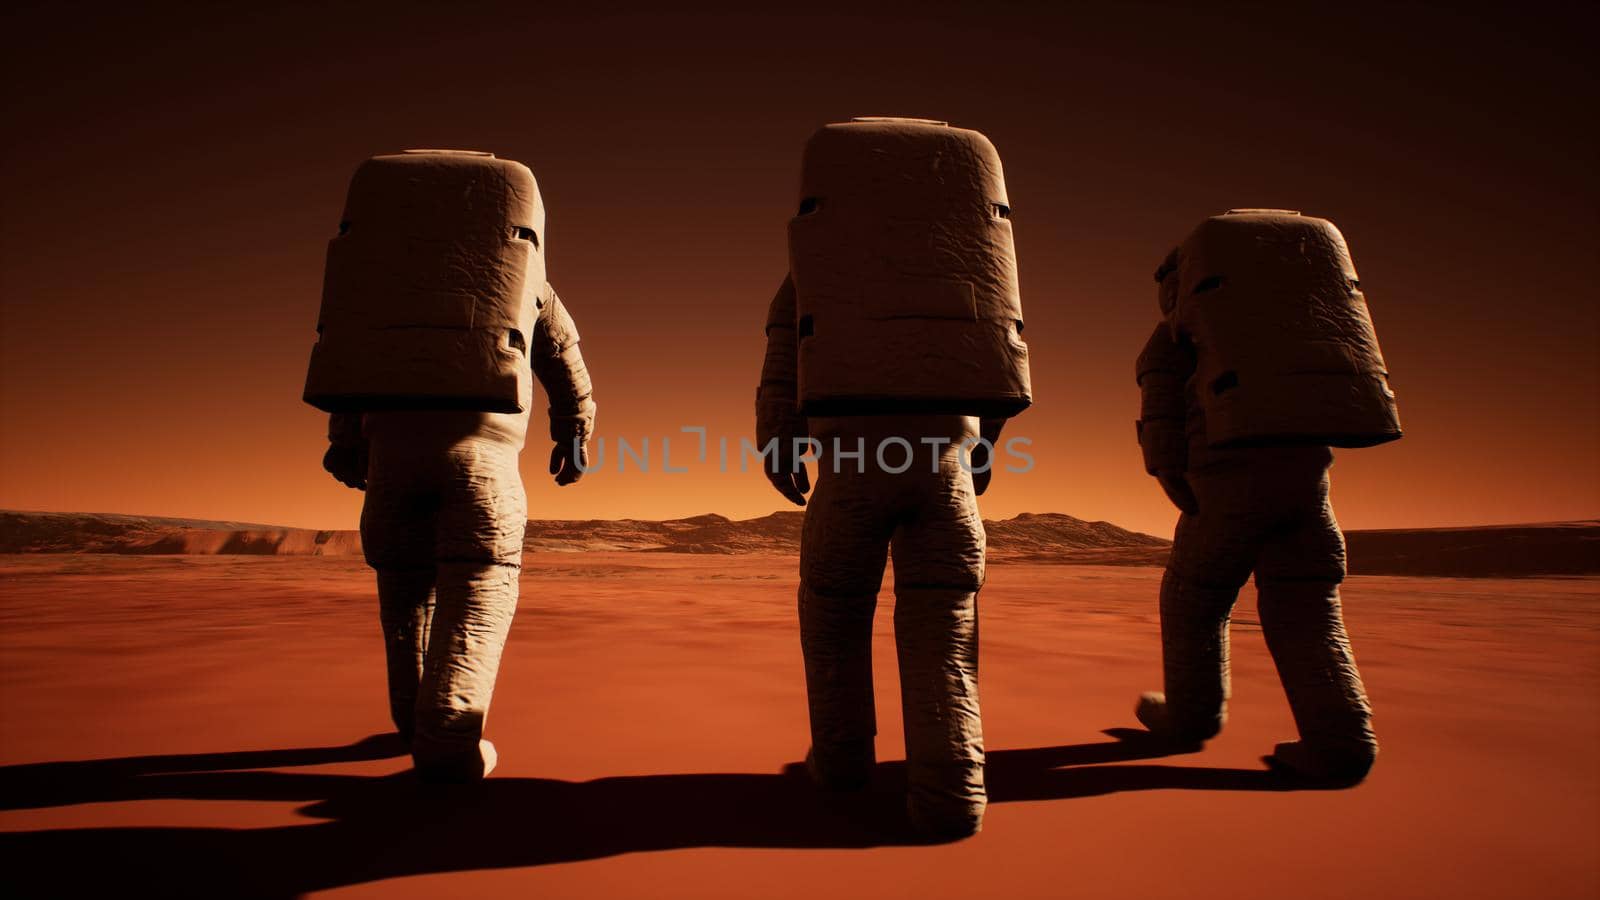 Three astronauts in spacesuits confidently walk on Mars in search of life